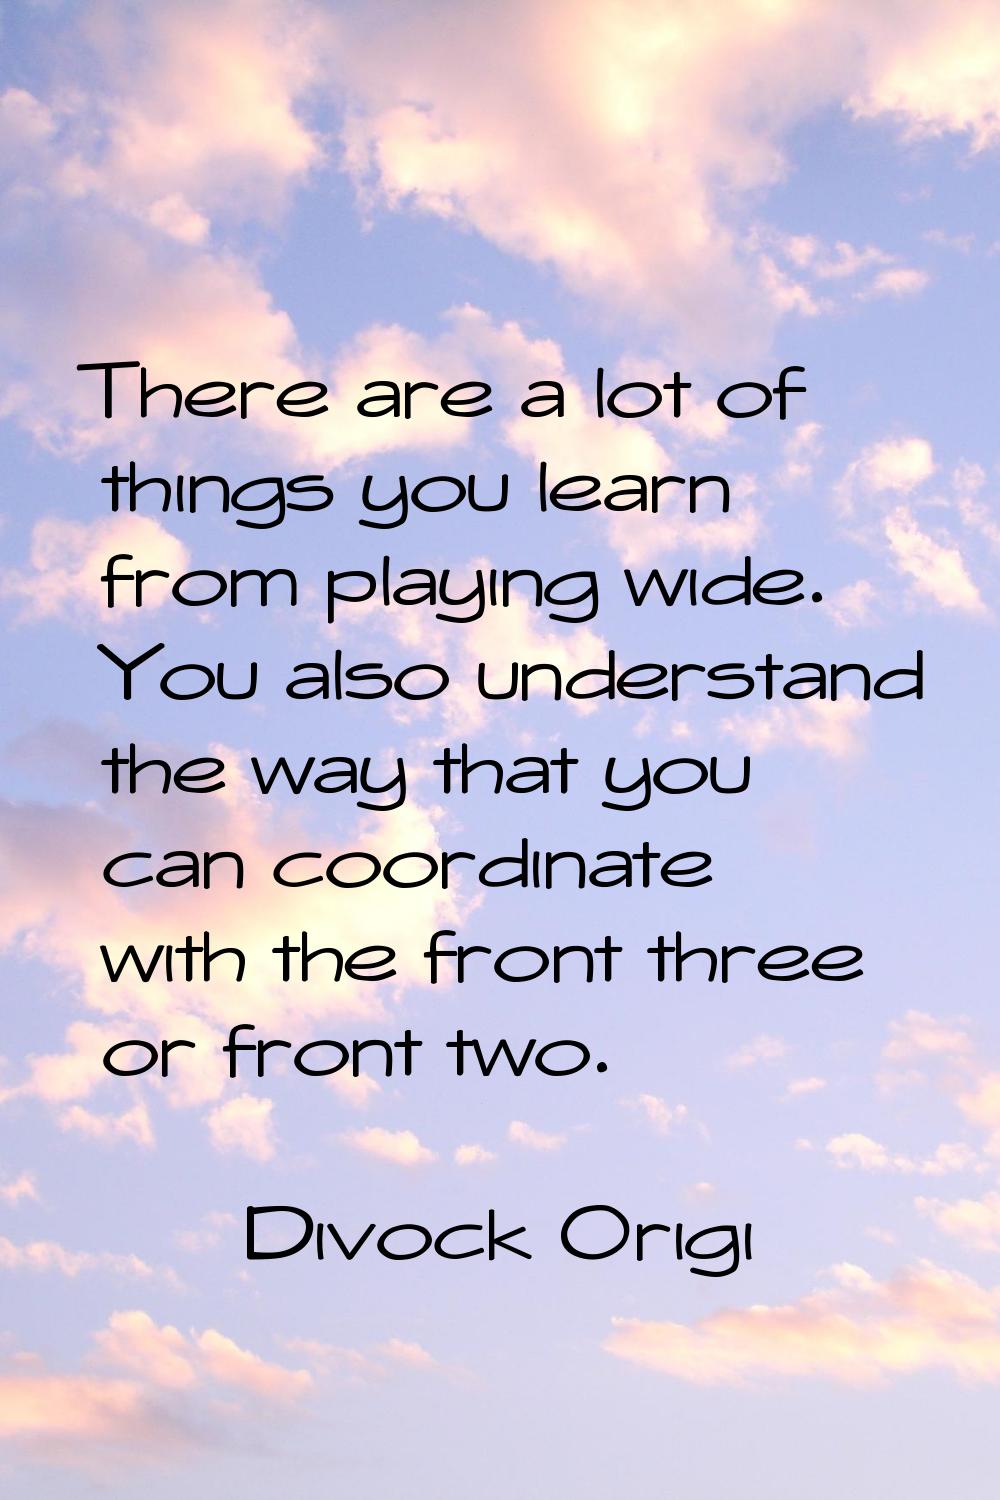 There are a lot of things you learn from playing wide. You also understand the way that you can coo